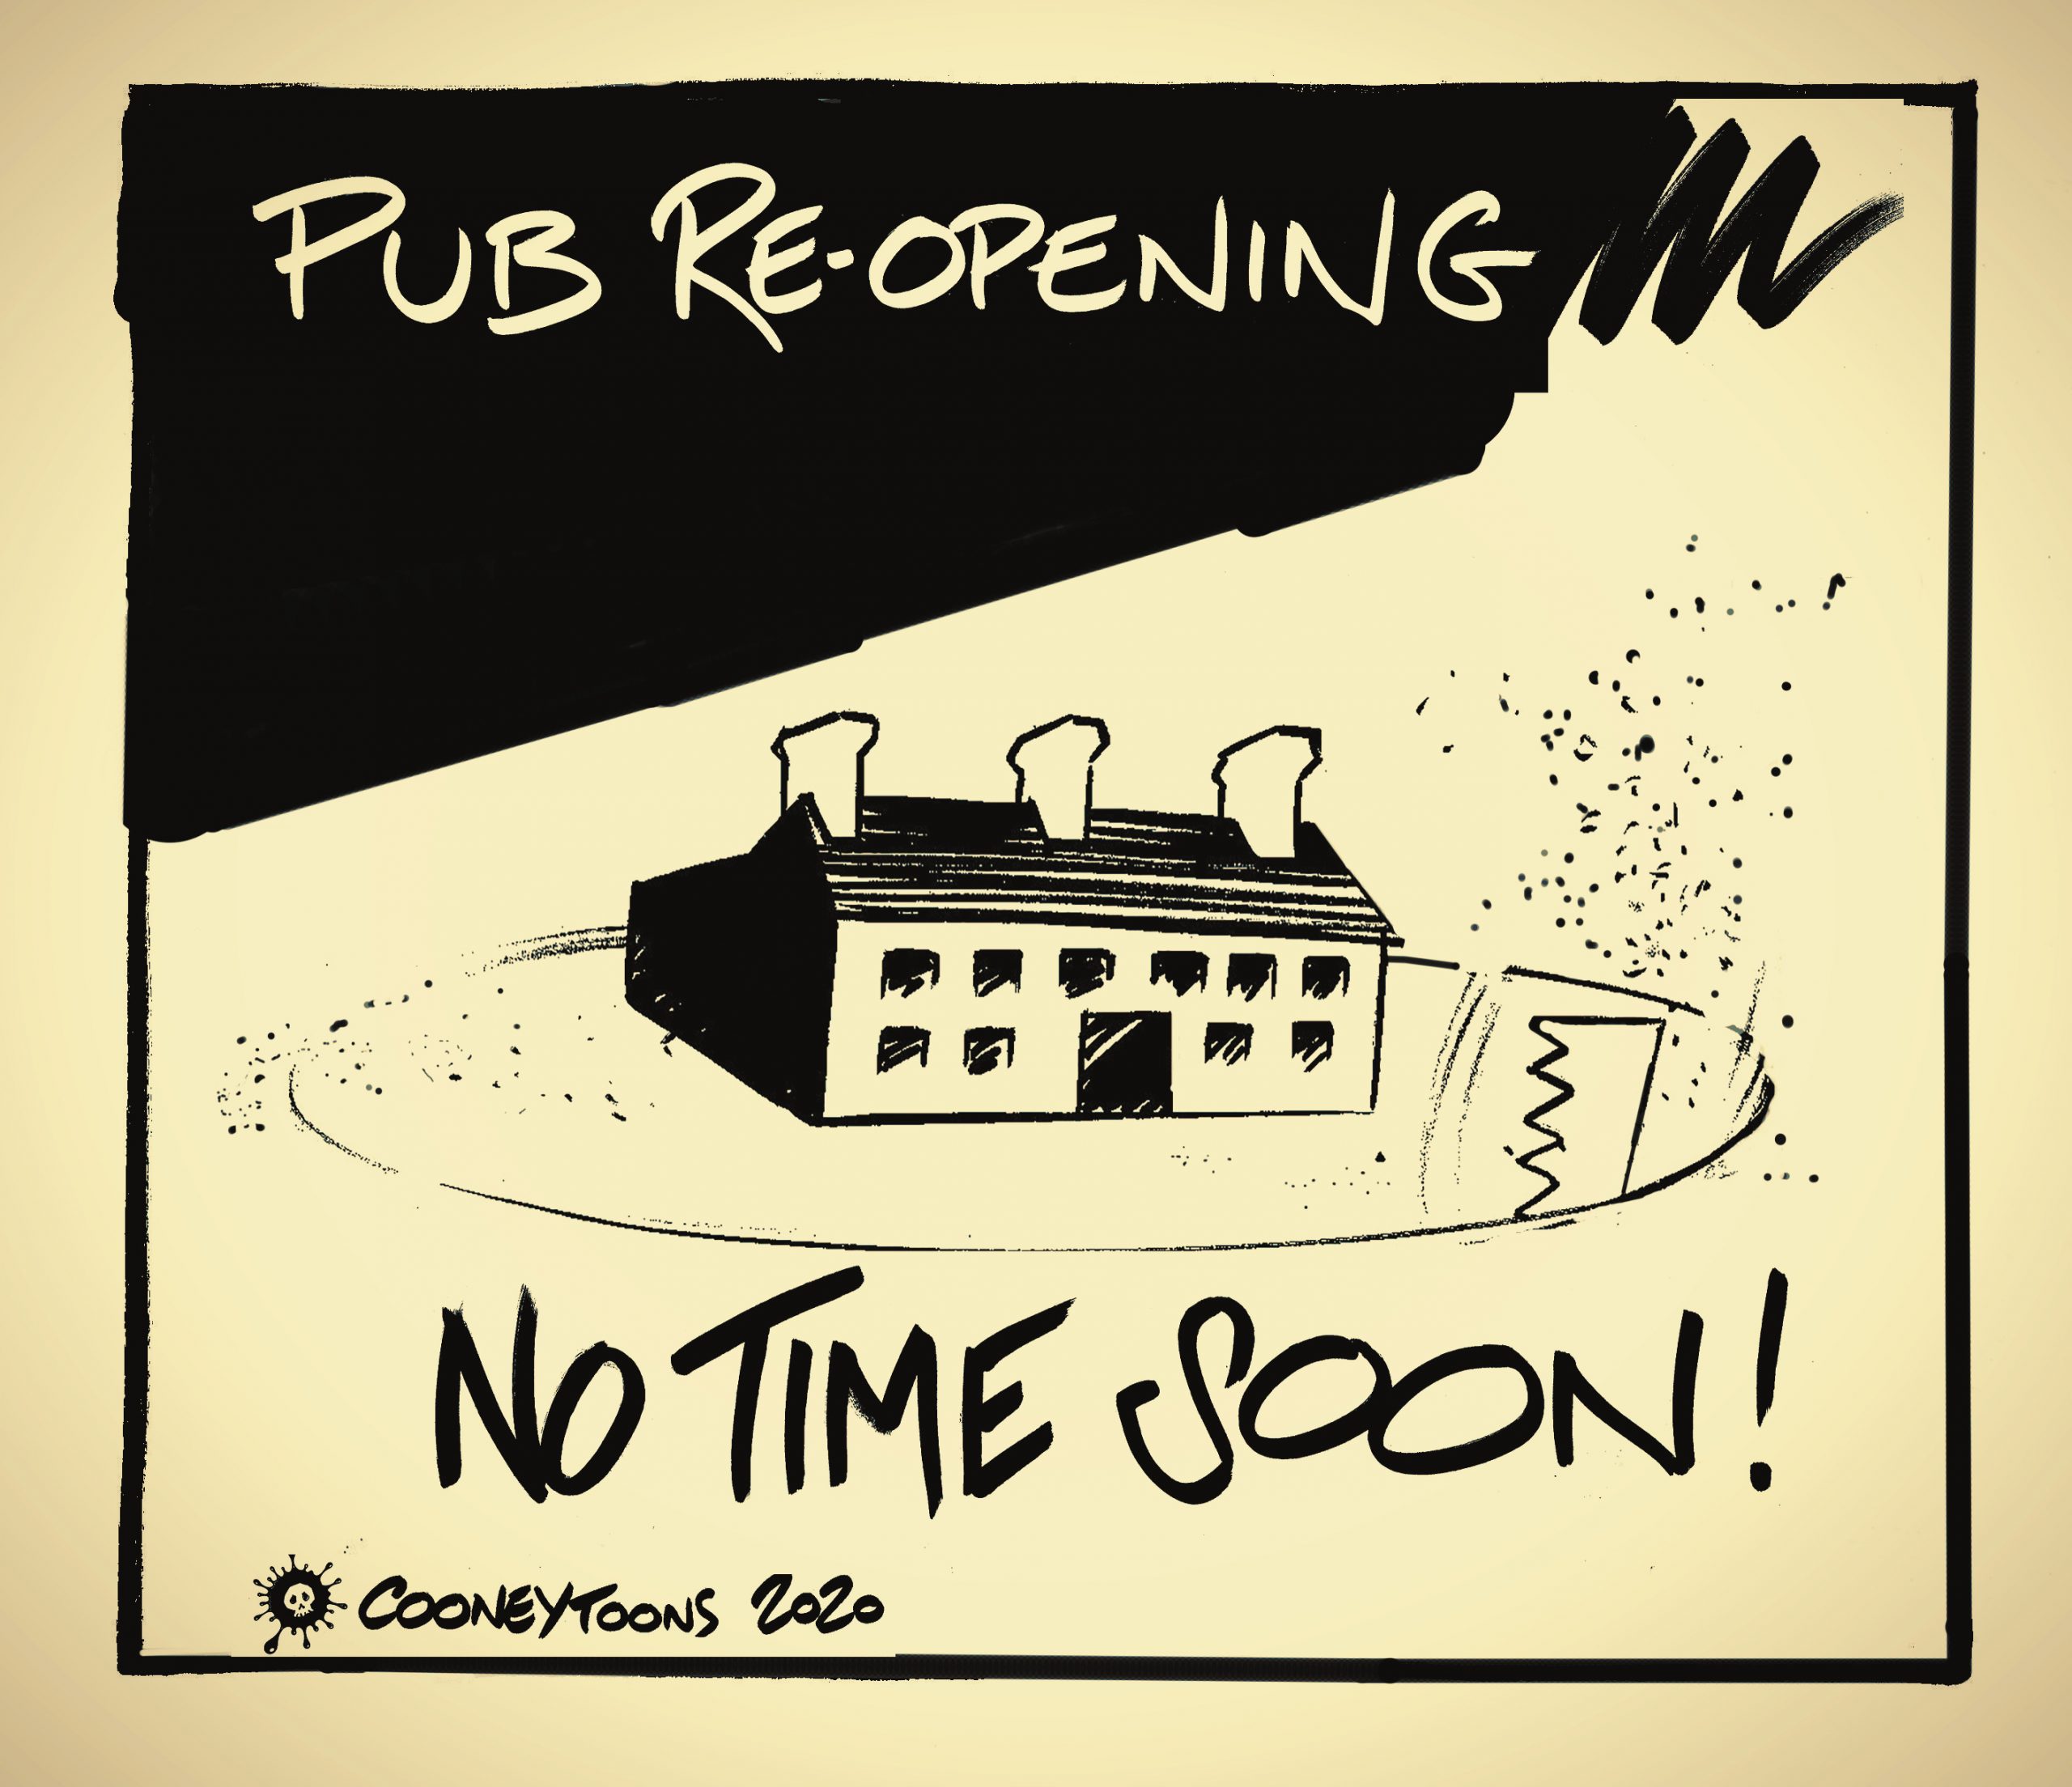 Only Pubs that serve food with social distancing are allowed remain open